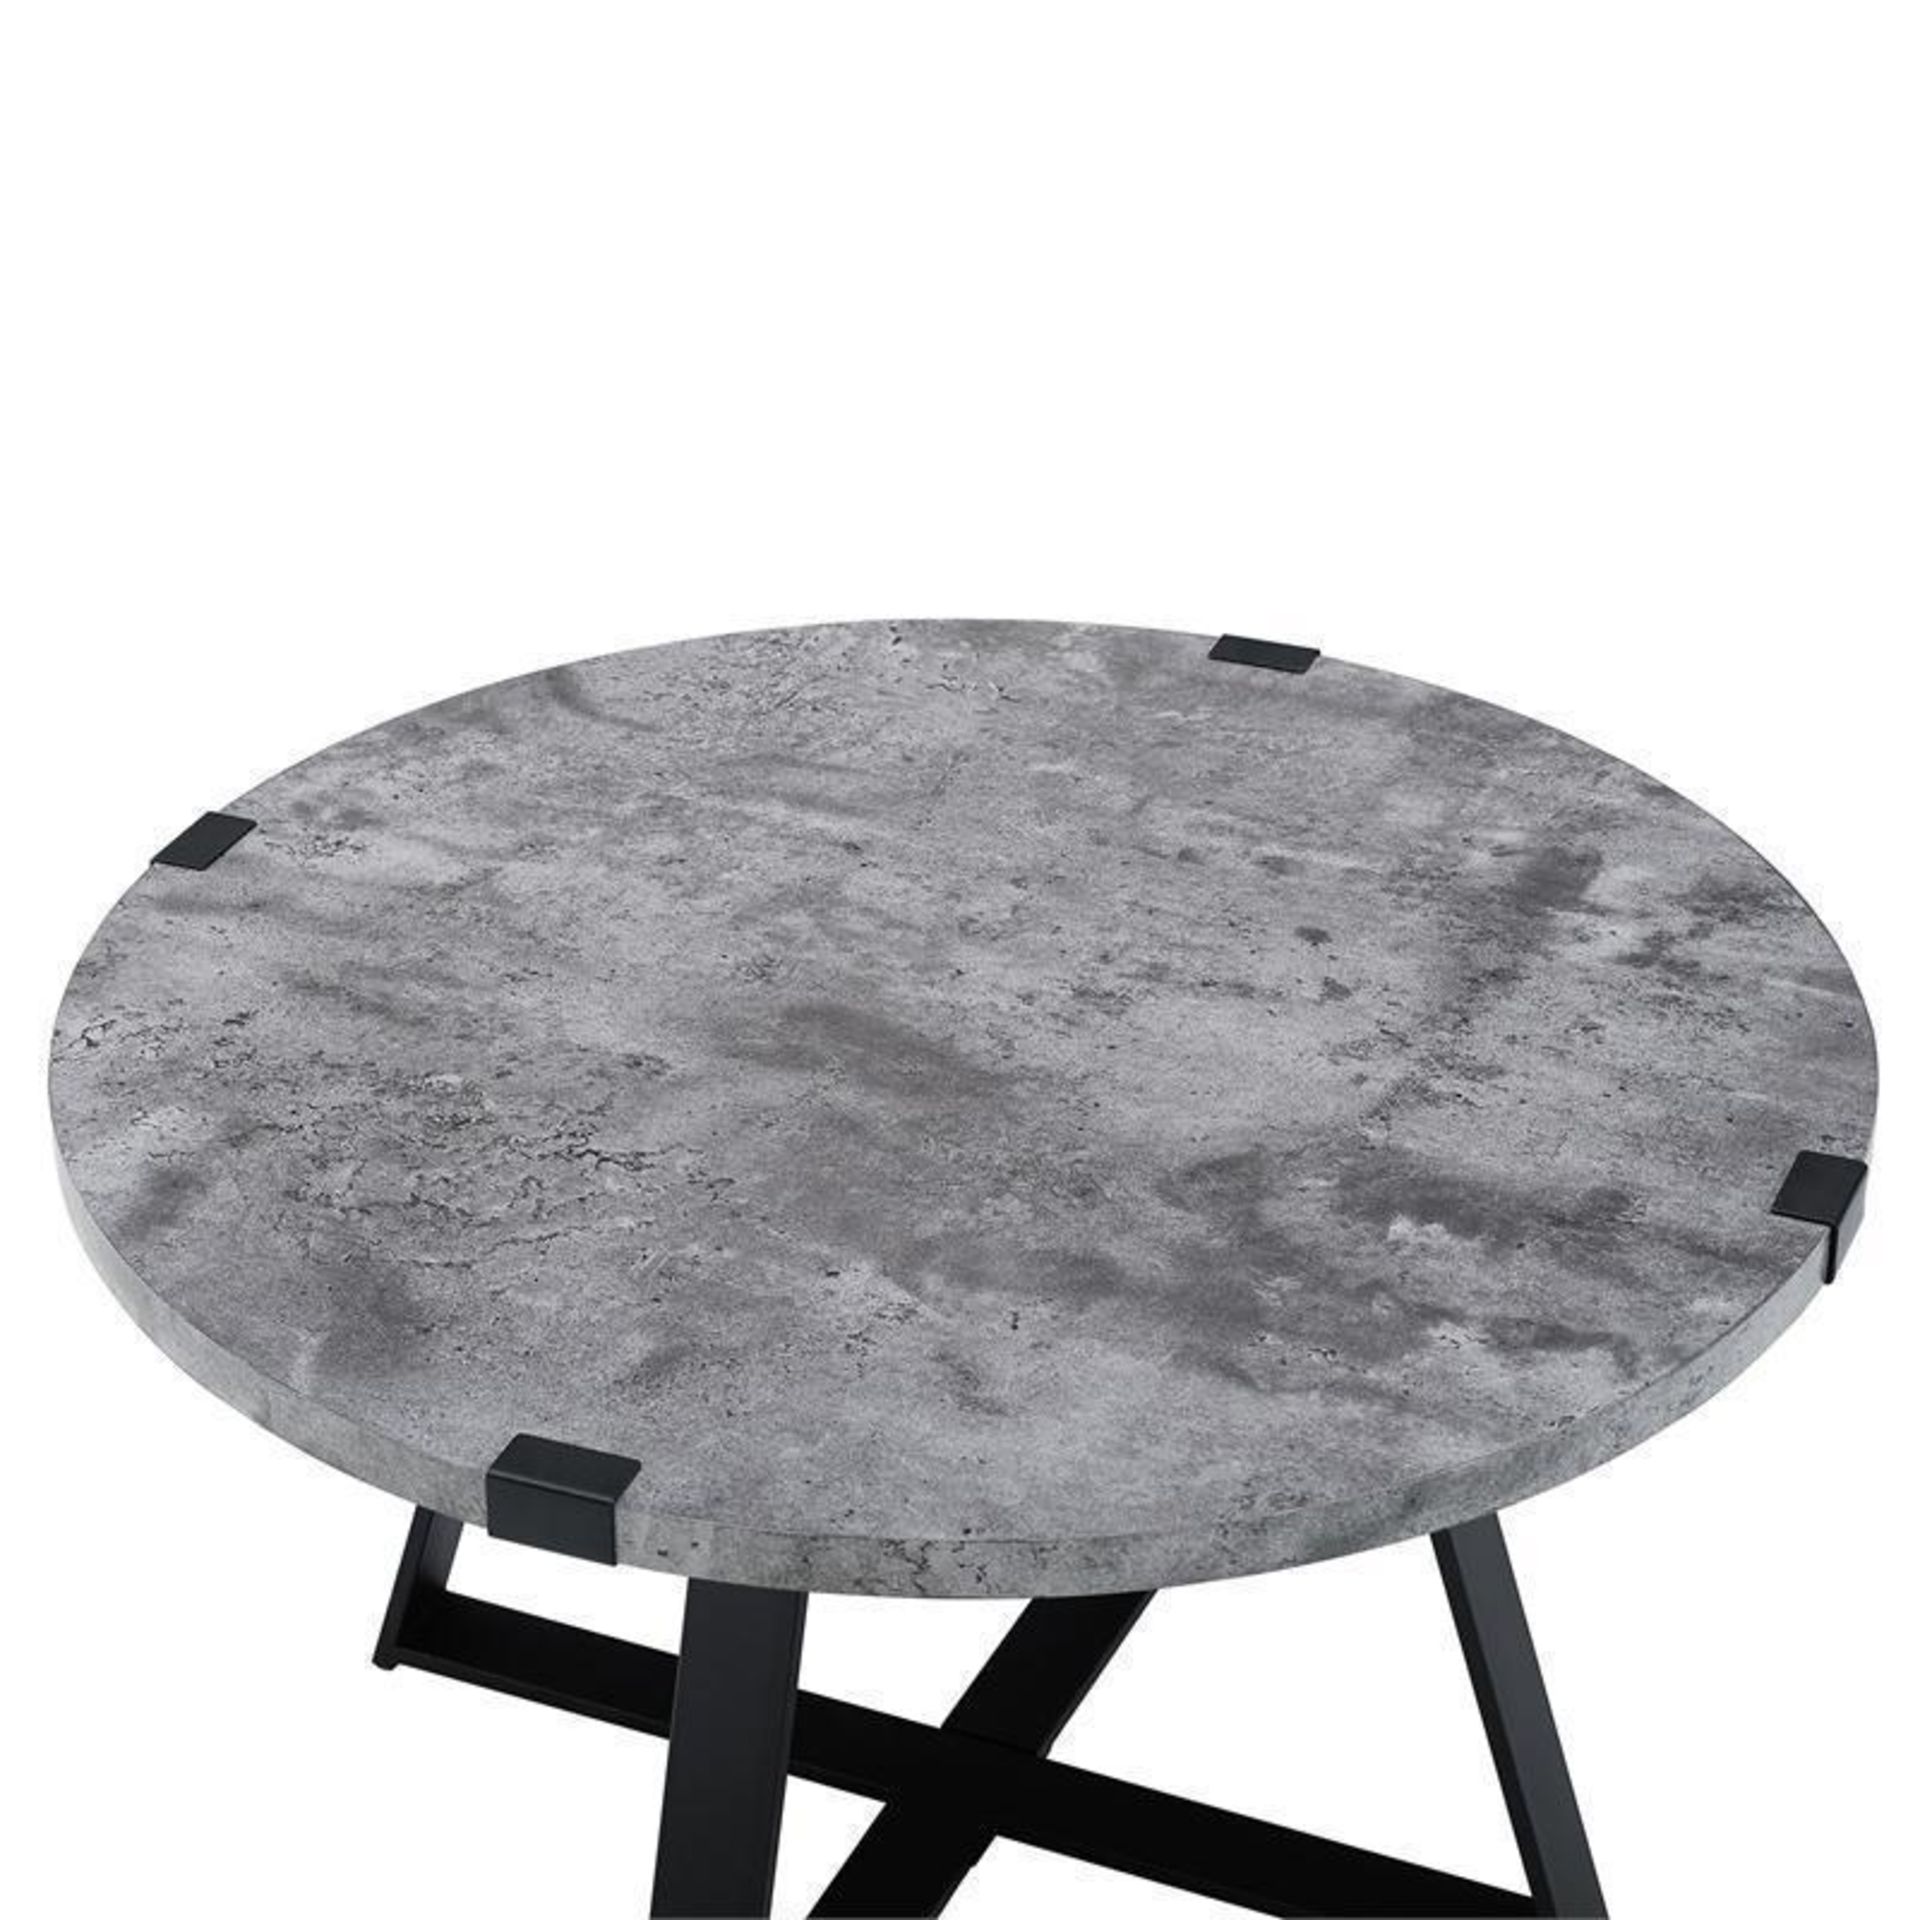 IRVINE DARK CONCRETE EFFECT COFFEE TABLE WITH BLACK FRAME (GREY) - RRP £245 - Image 4 of 5